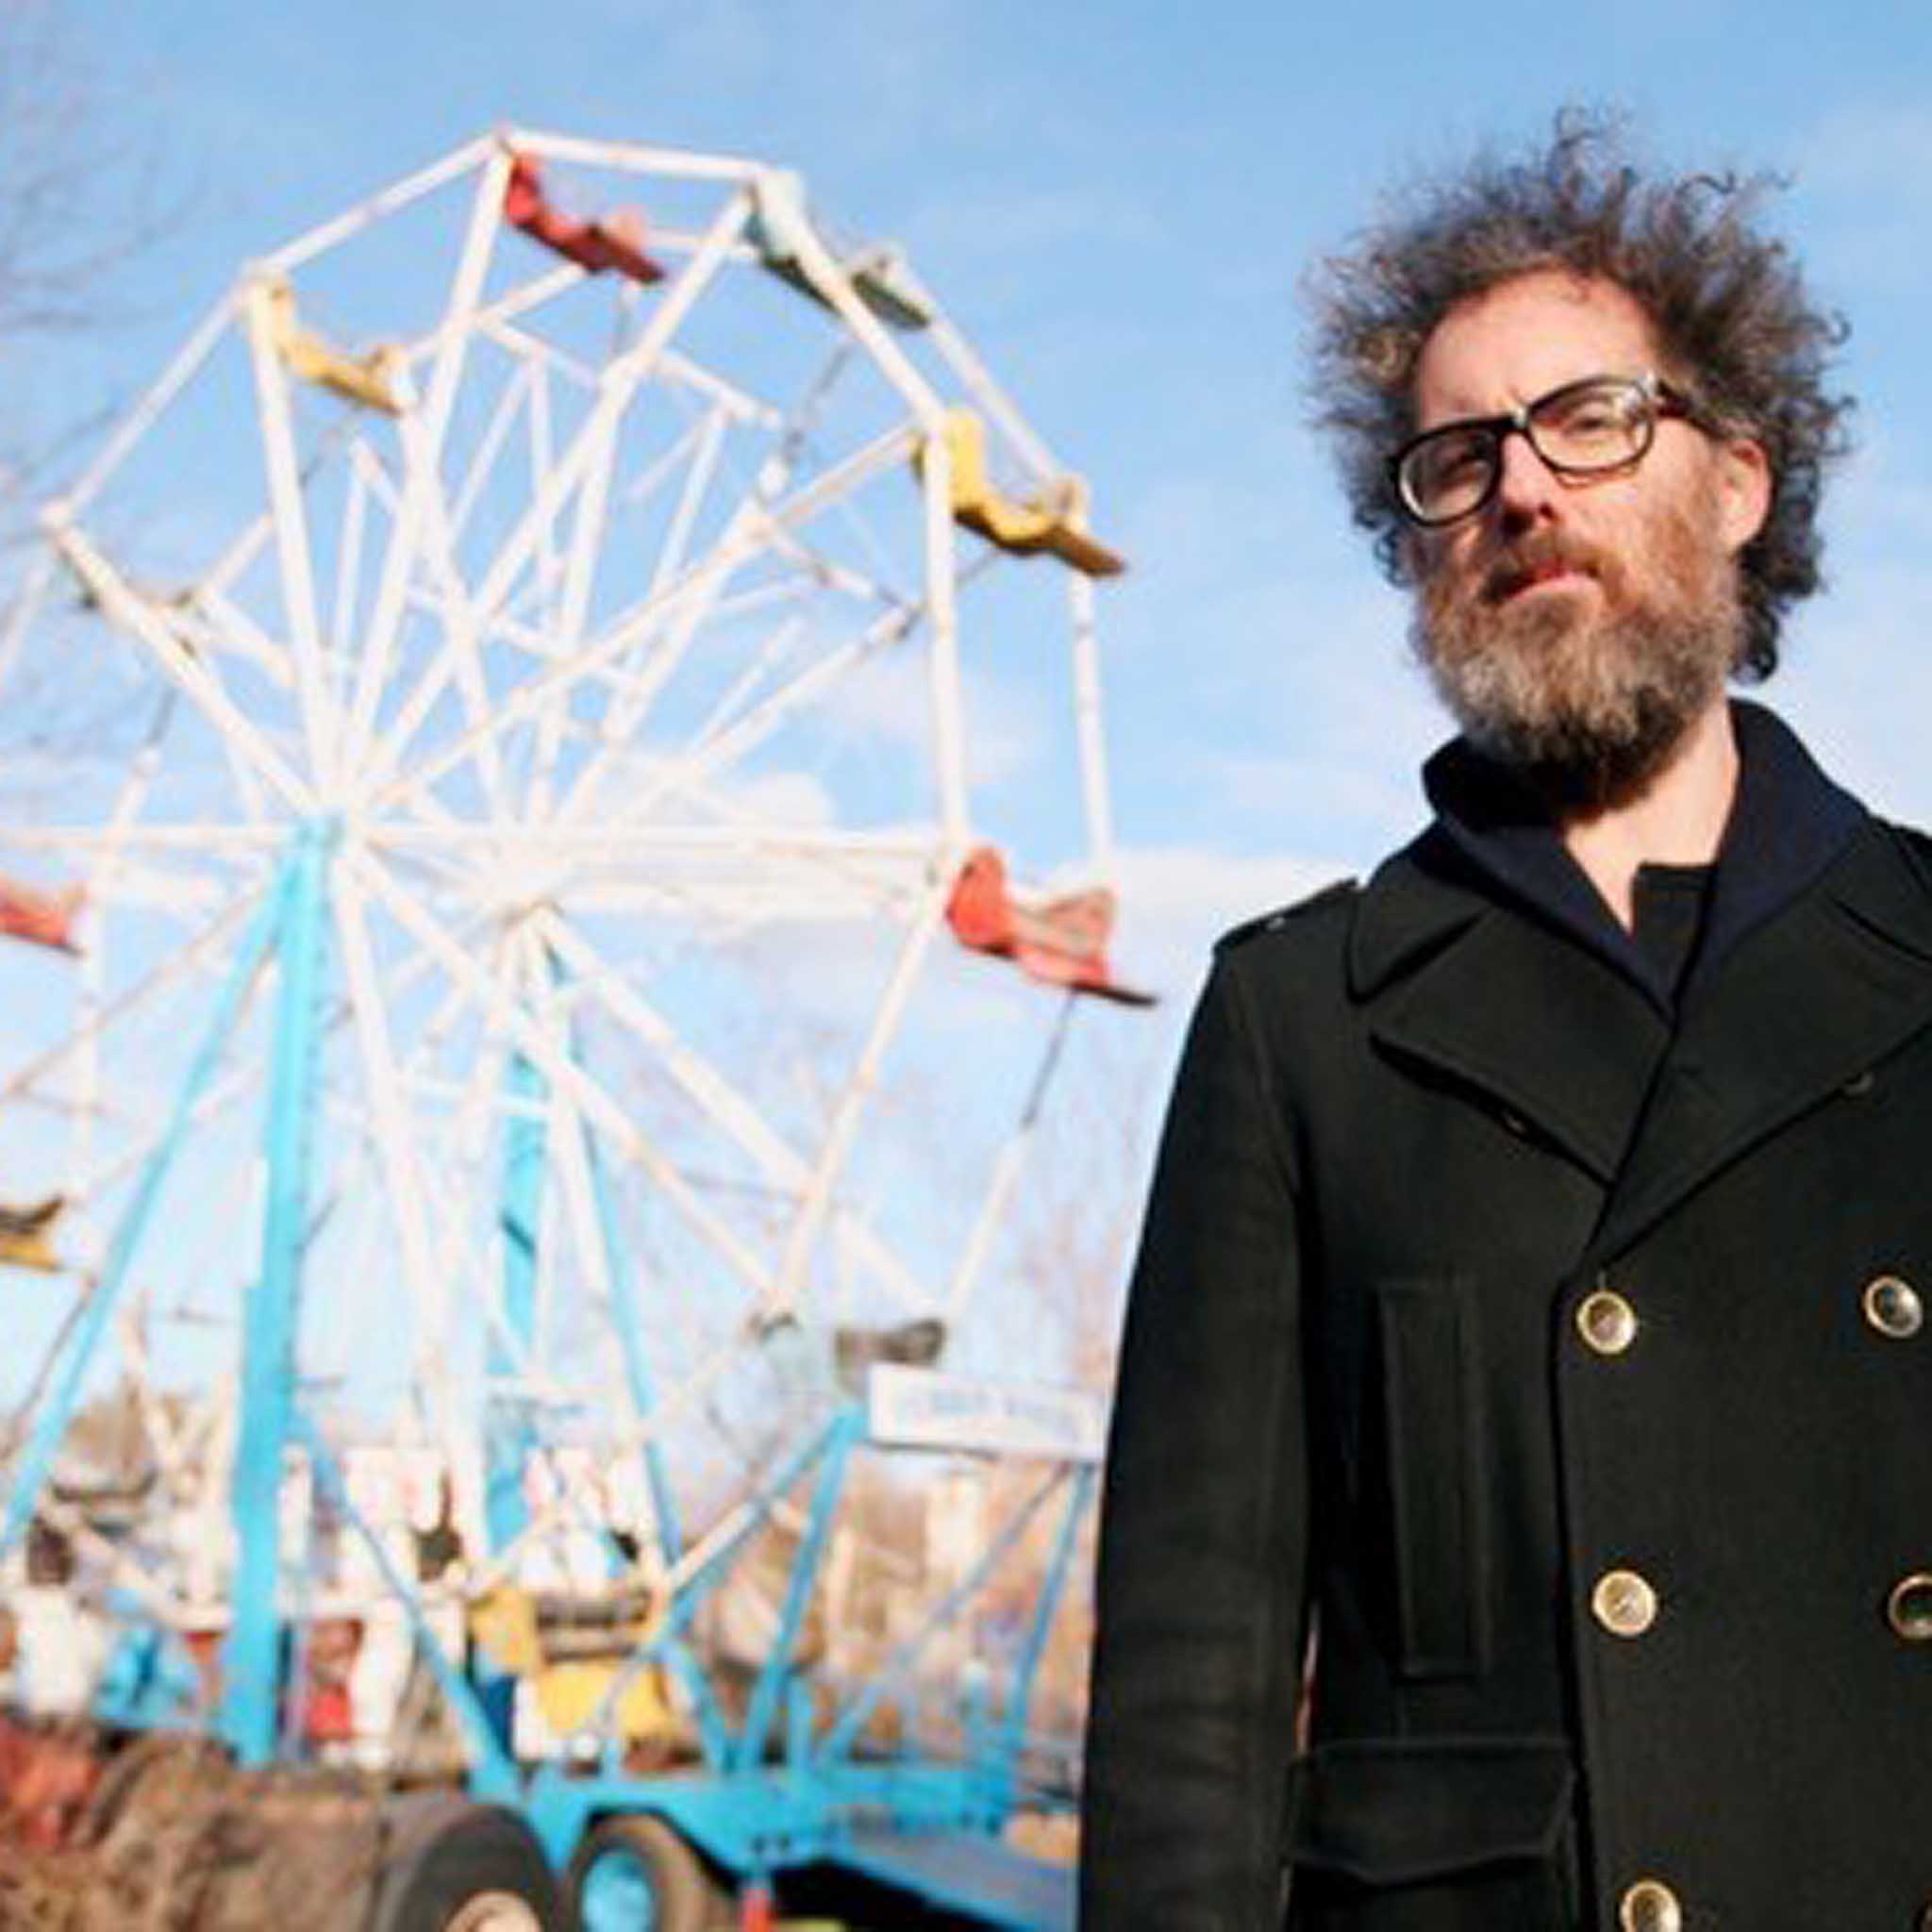 Two teams of upcycling geniuses compete over three days to turn a rusted old ferris wheel into must-have high-end products. 